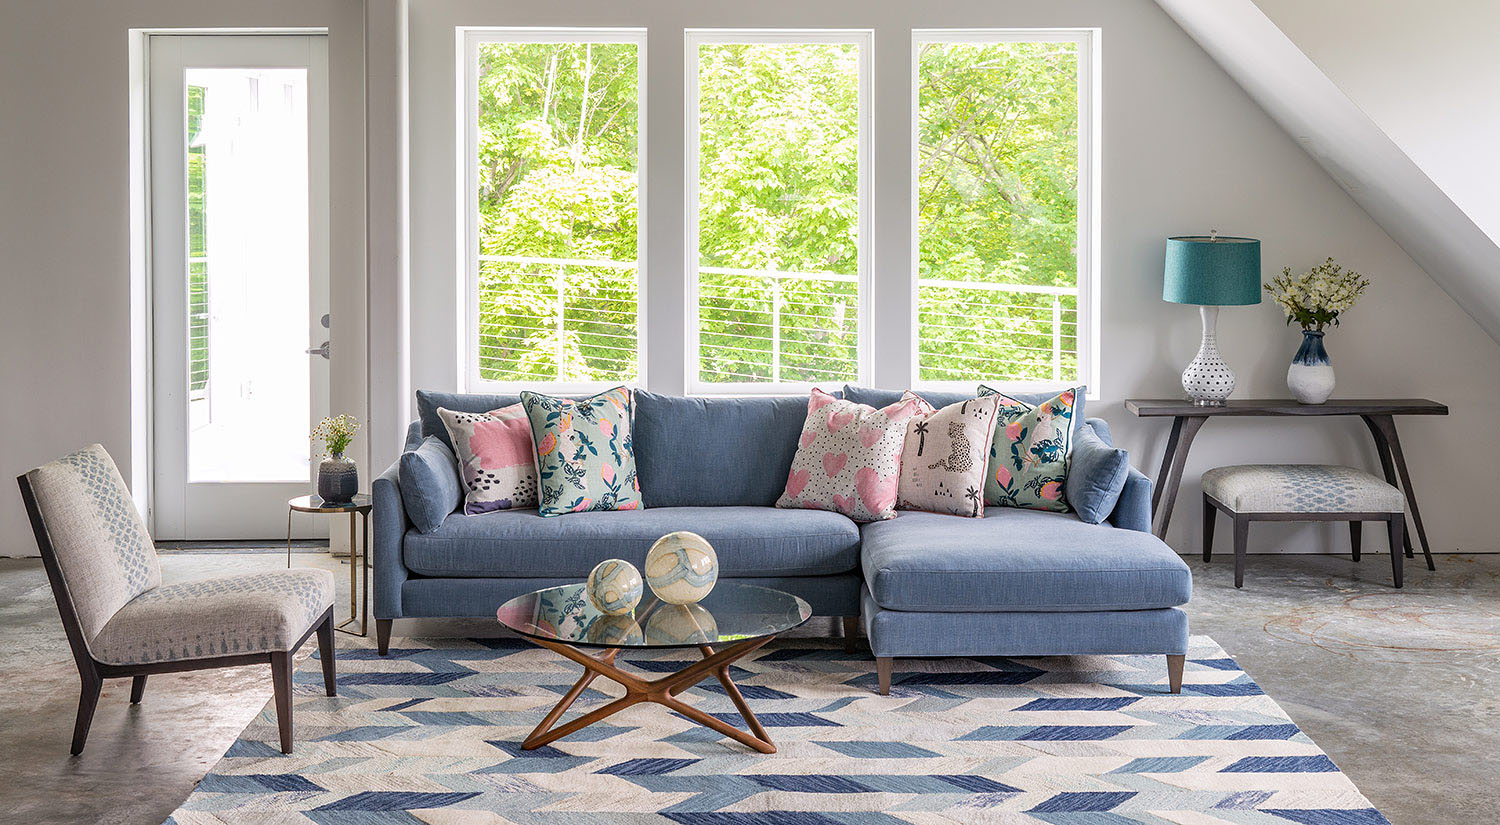 What Is Upholstery and How Do You Choose the Best Fabric for Your Sofa?